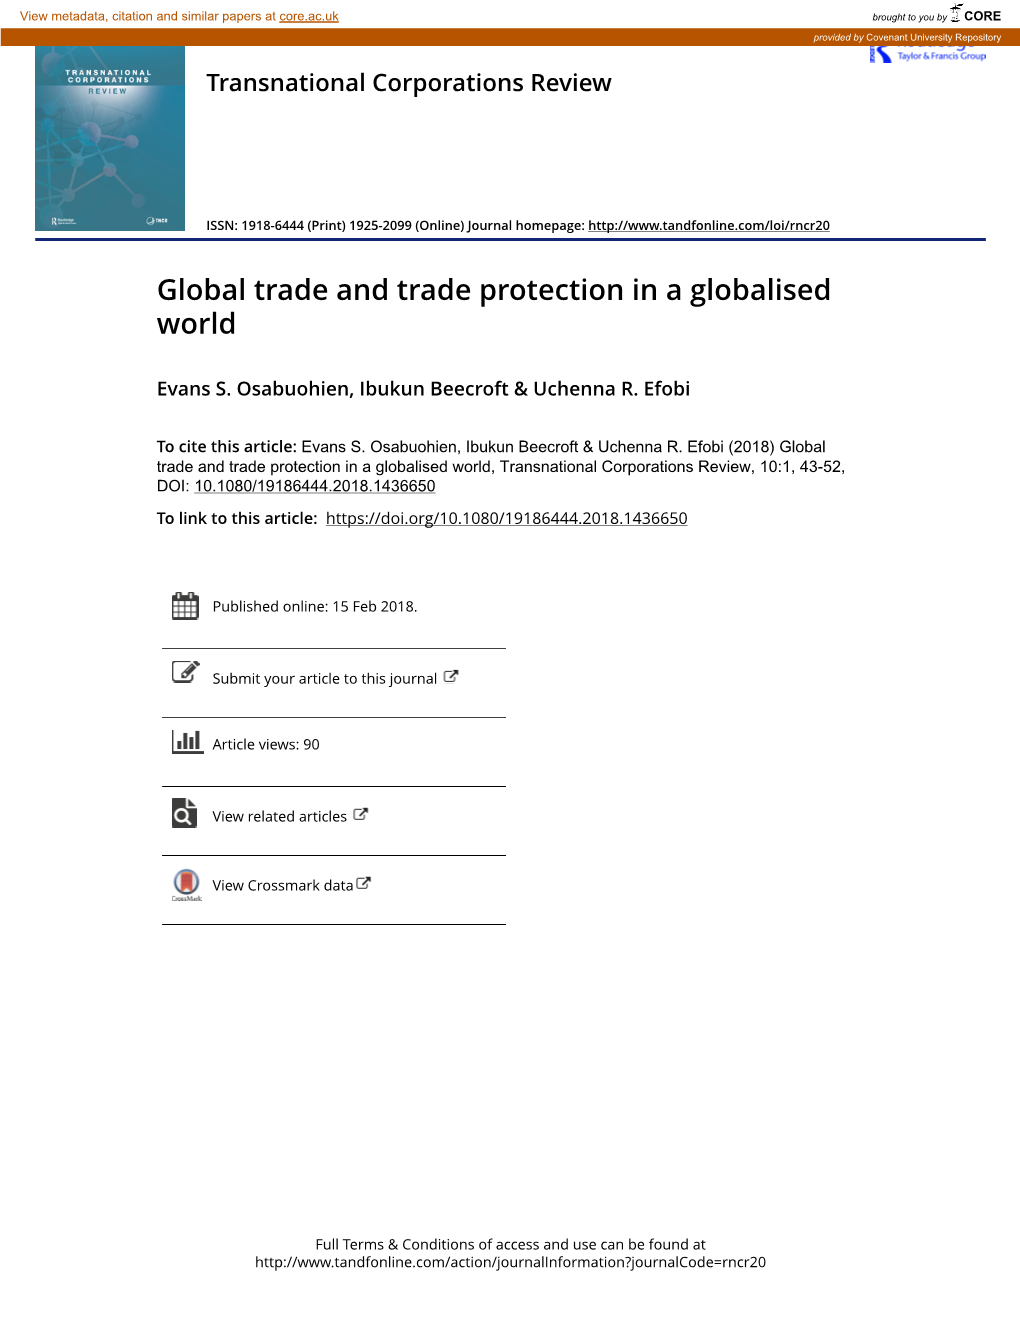 Global Trade and Trade Protection in a Globalised World